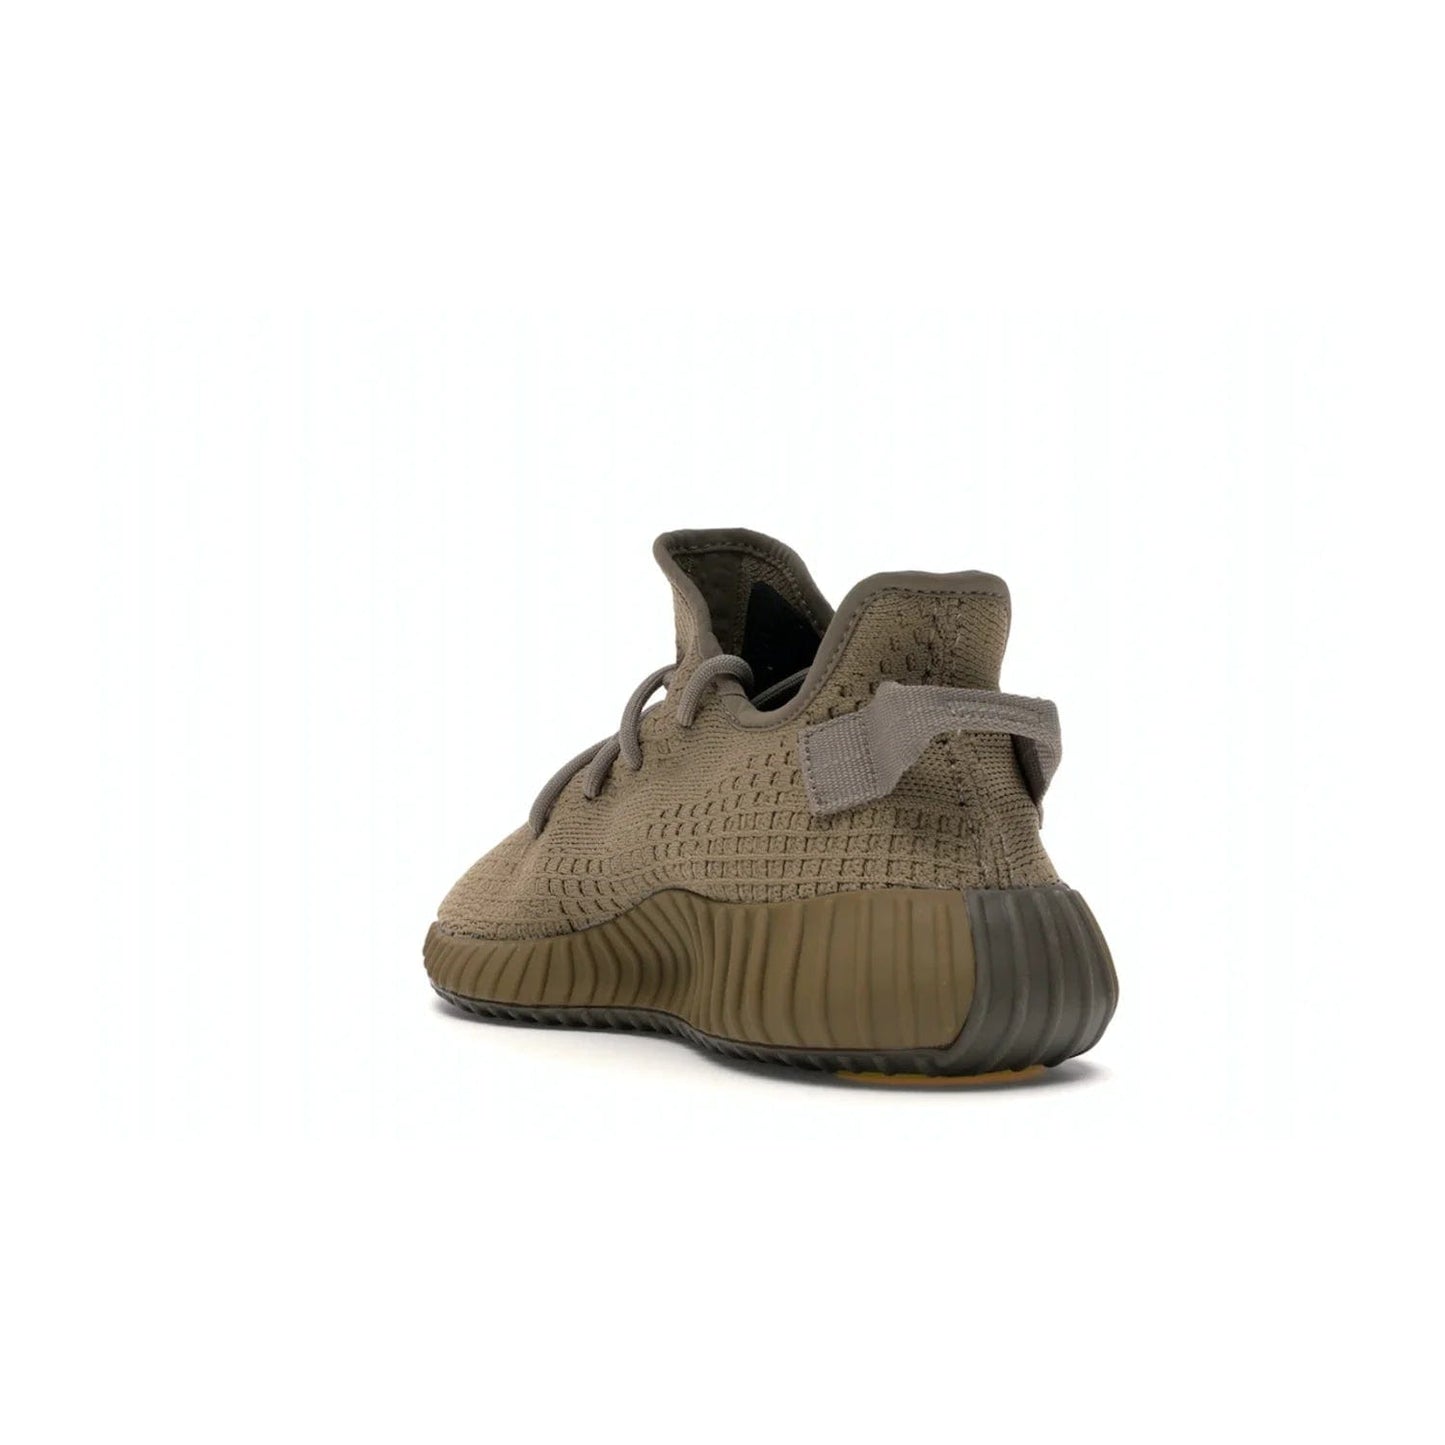 adidas Yeezy Boost 350 V2 Earth - Image 25 - Only at www.BallersClubKickz.com - Abstract style with the adidas Yeezy Boost 350 V2 Earth. Crafted with mud Primeknit upper, mud Boost and interior, and a translucent side stripe. Regional exclusive in Earth/Earth/Earth colorway, these fashionable sneakers released in February 2020. Showcase your style with the Yeezy 350 V2 Earth.